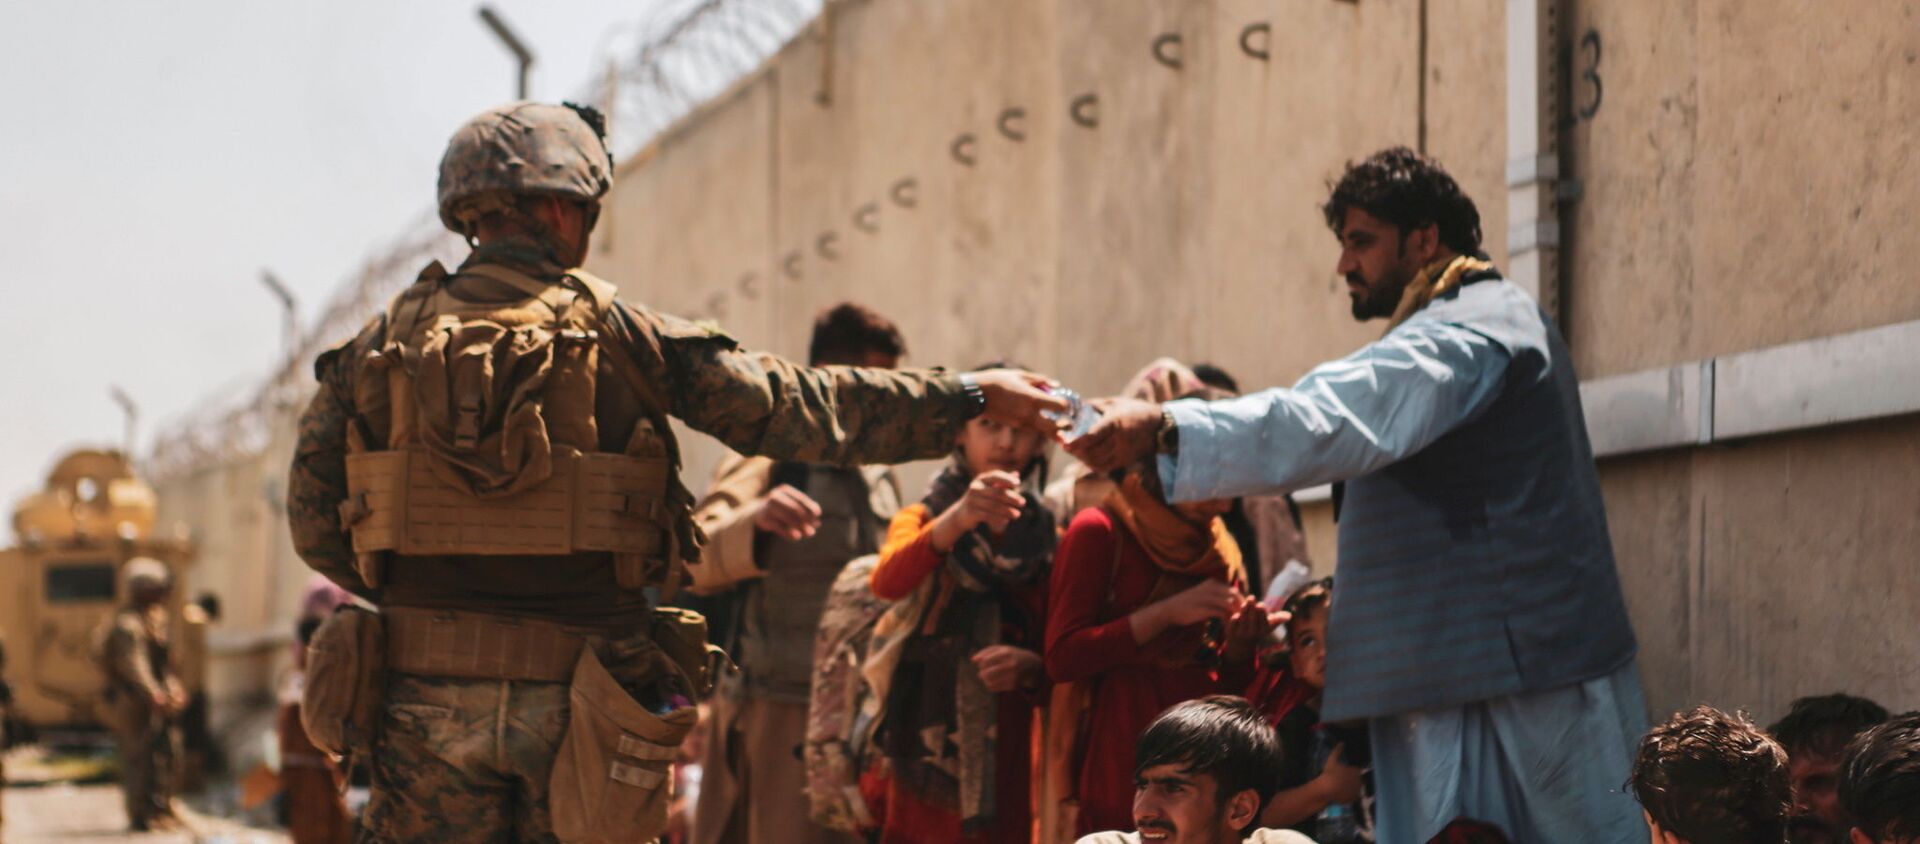 A US Marine passes out water to evacuees during an evacuation at Hamid Karzai International Airport, Kabul, Afghanistan, August 22, 2021 - Sputnik International, 1920